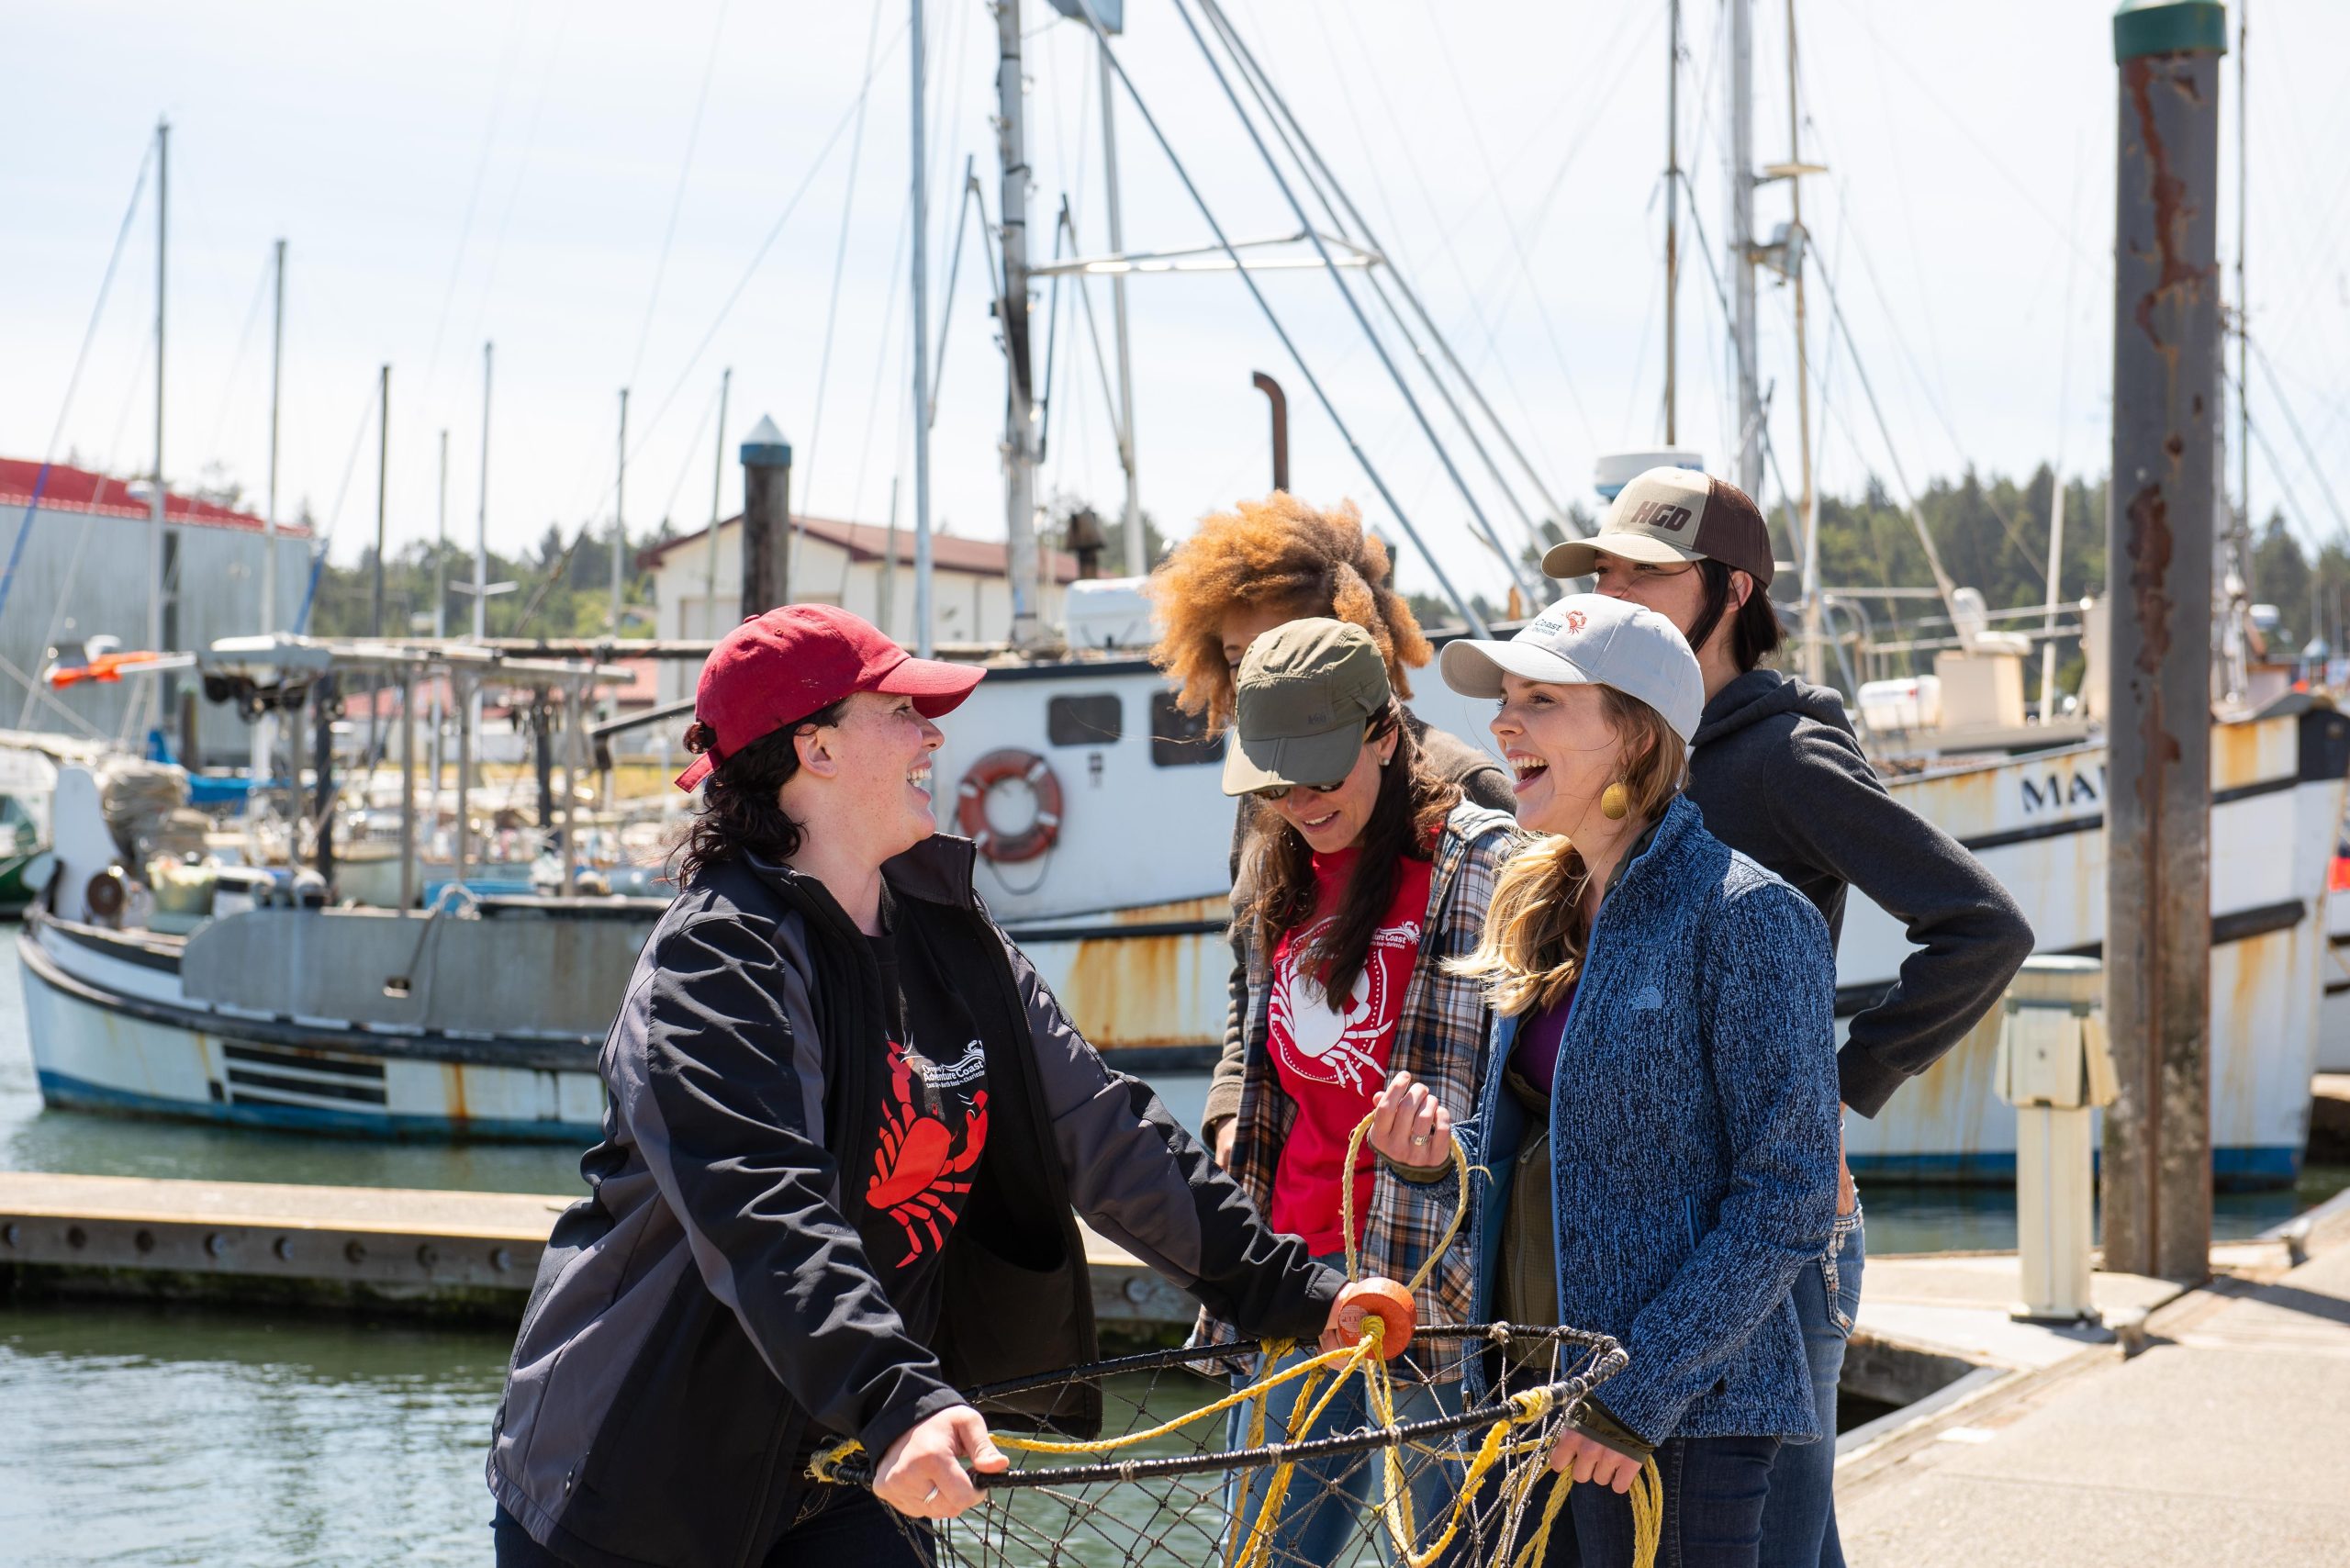 The Oregon coast is a perfect spot to enjoy some crabbing with your friends.